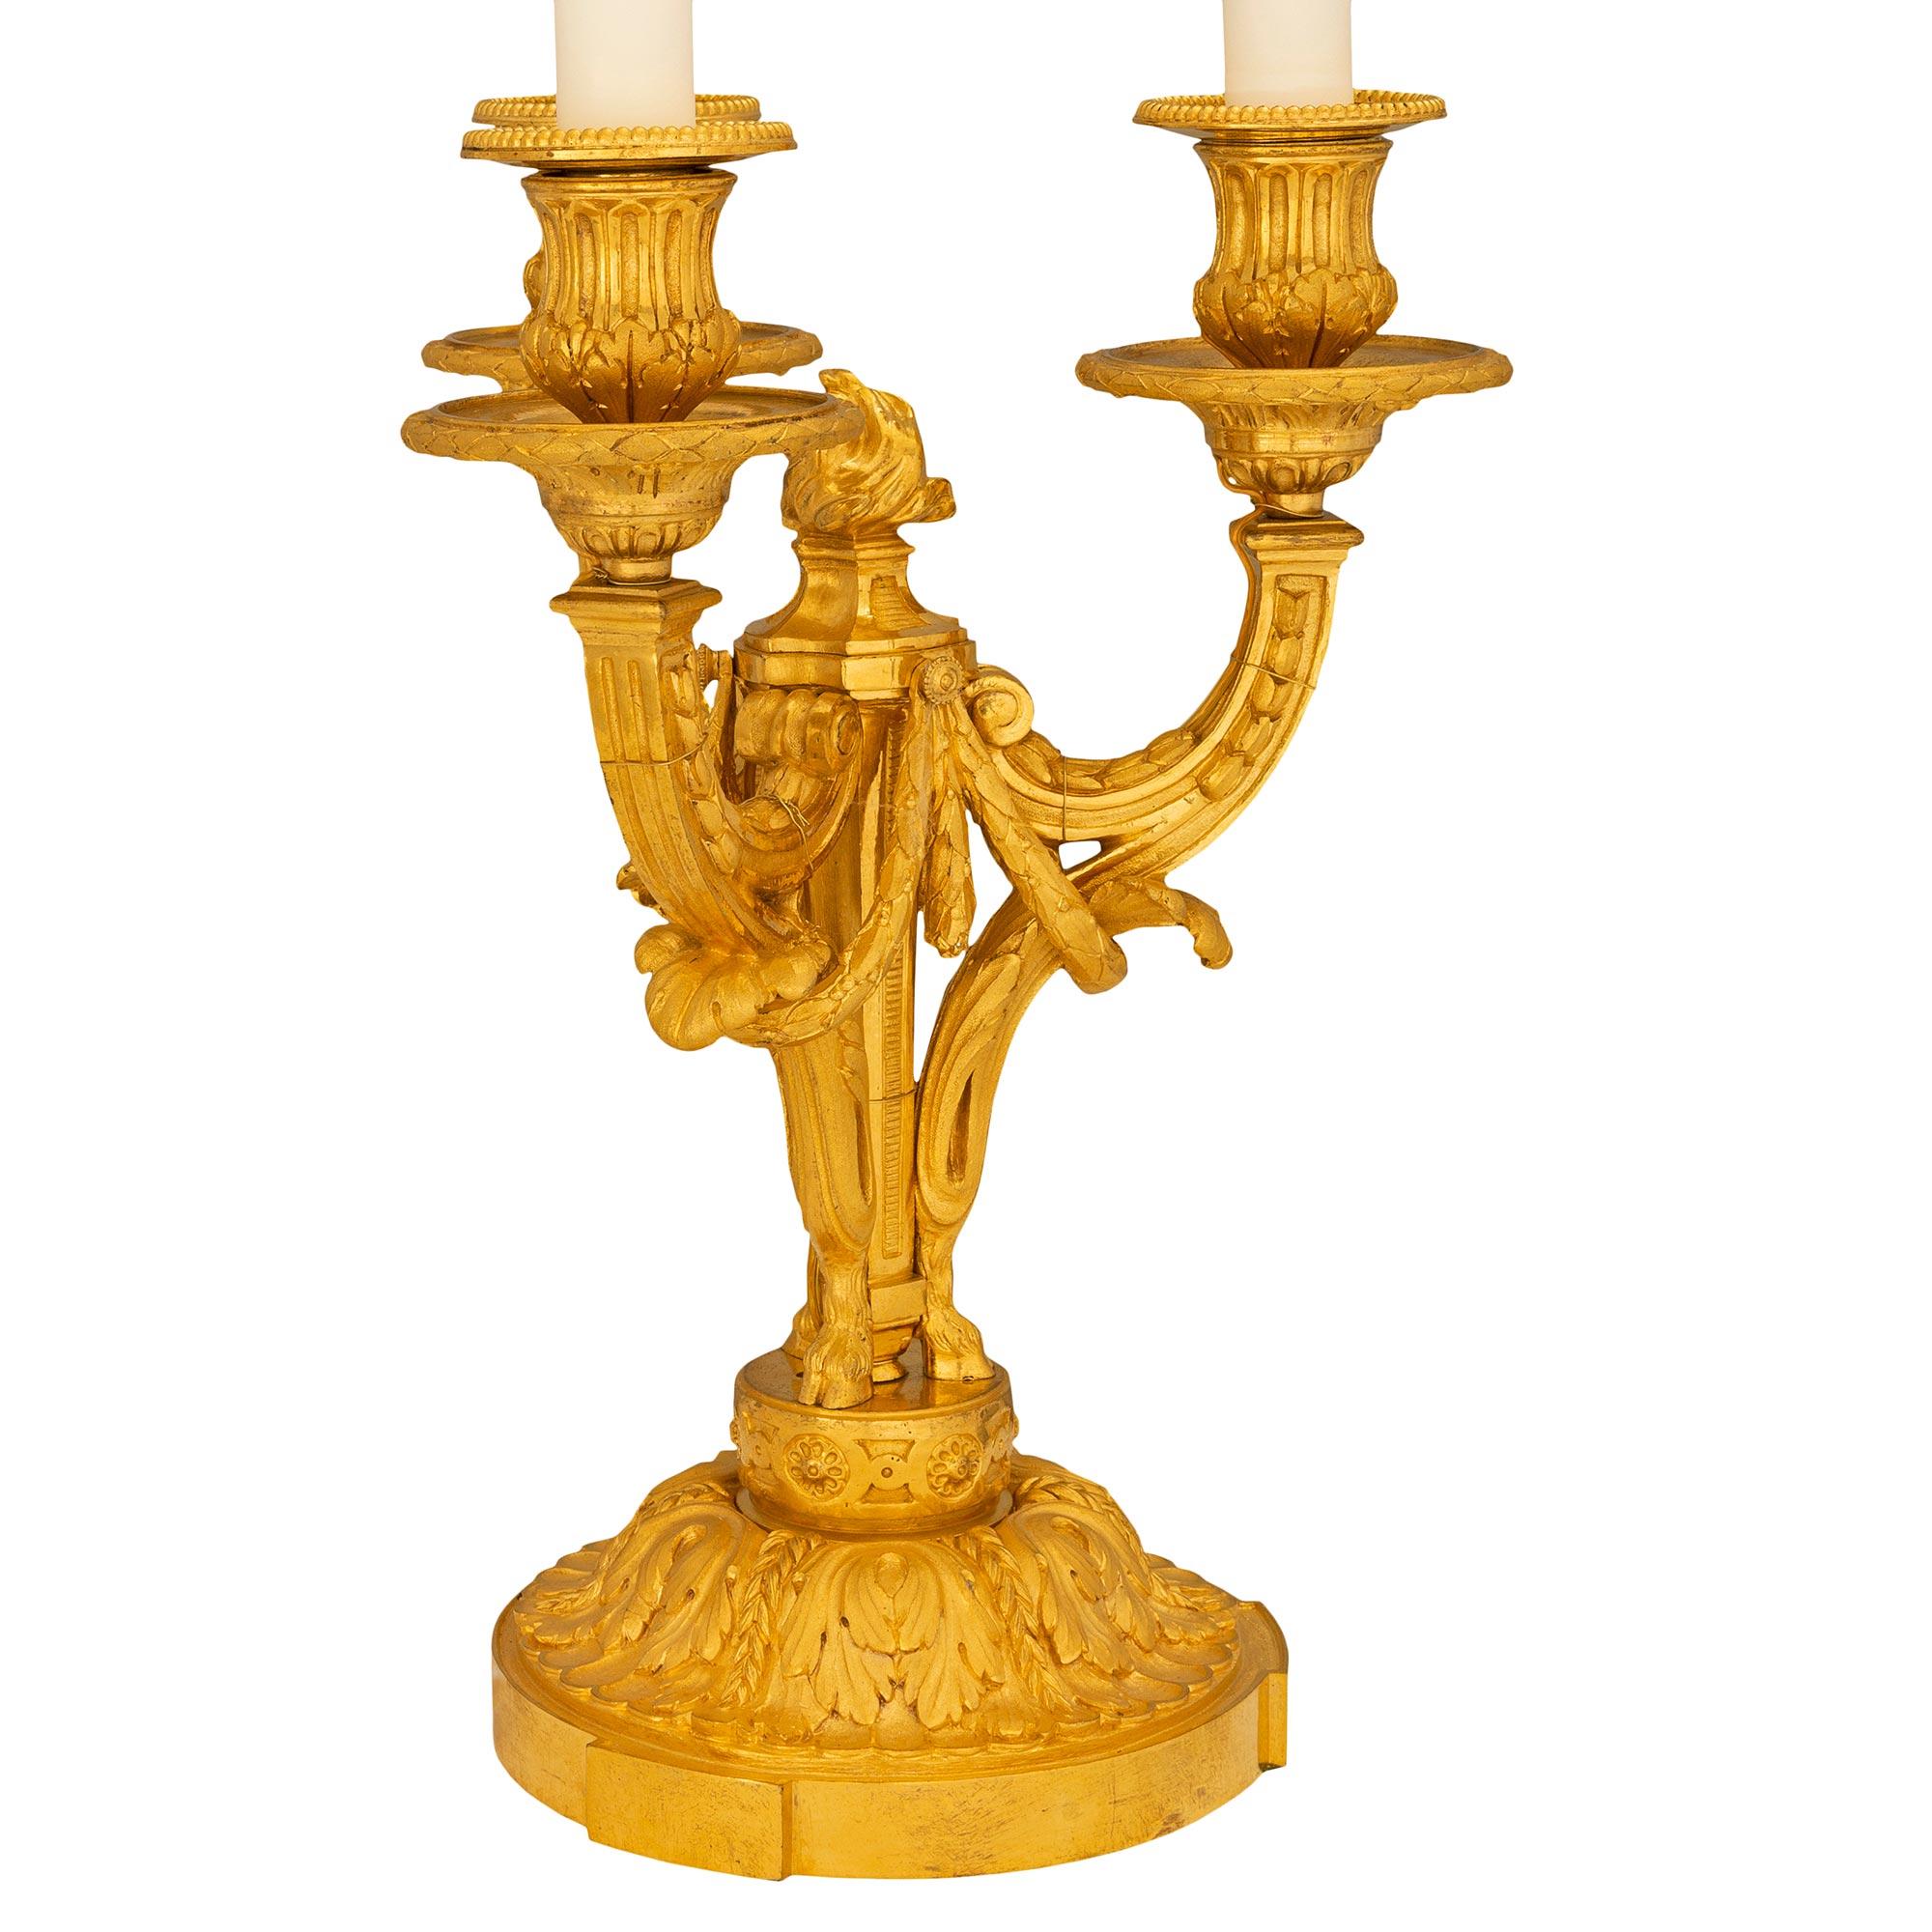 A pair of exceptional French mid 19th century Louis XVI st. ormolu three light candelabra lamps. Each richly chased lamp is raised on a round base with acanthus leaves. The C scrolled arms decorated with laurel garlands, scrolls and acanthus leaves,